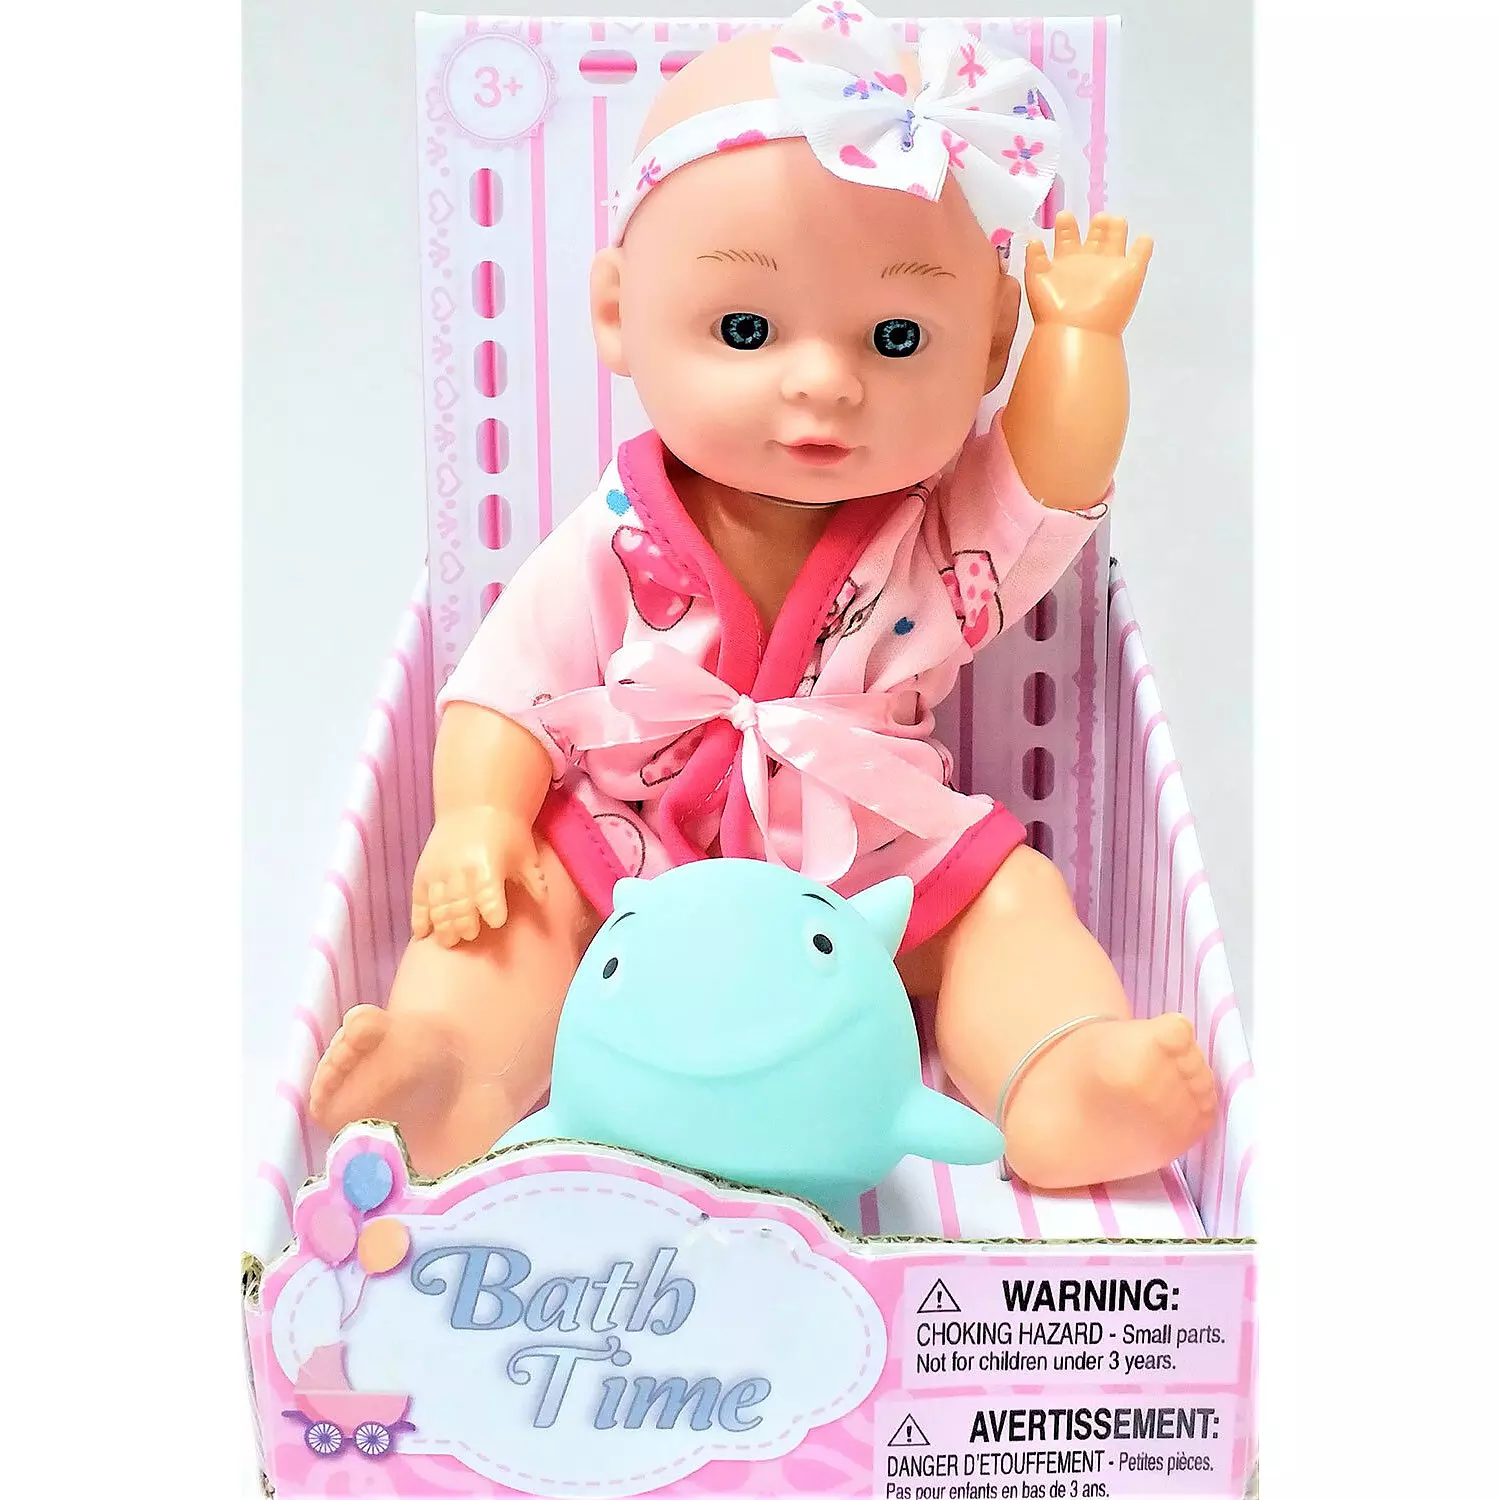 Bath time baby doll with toy